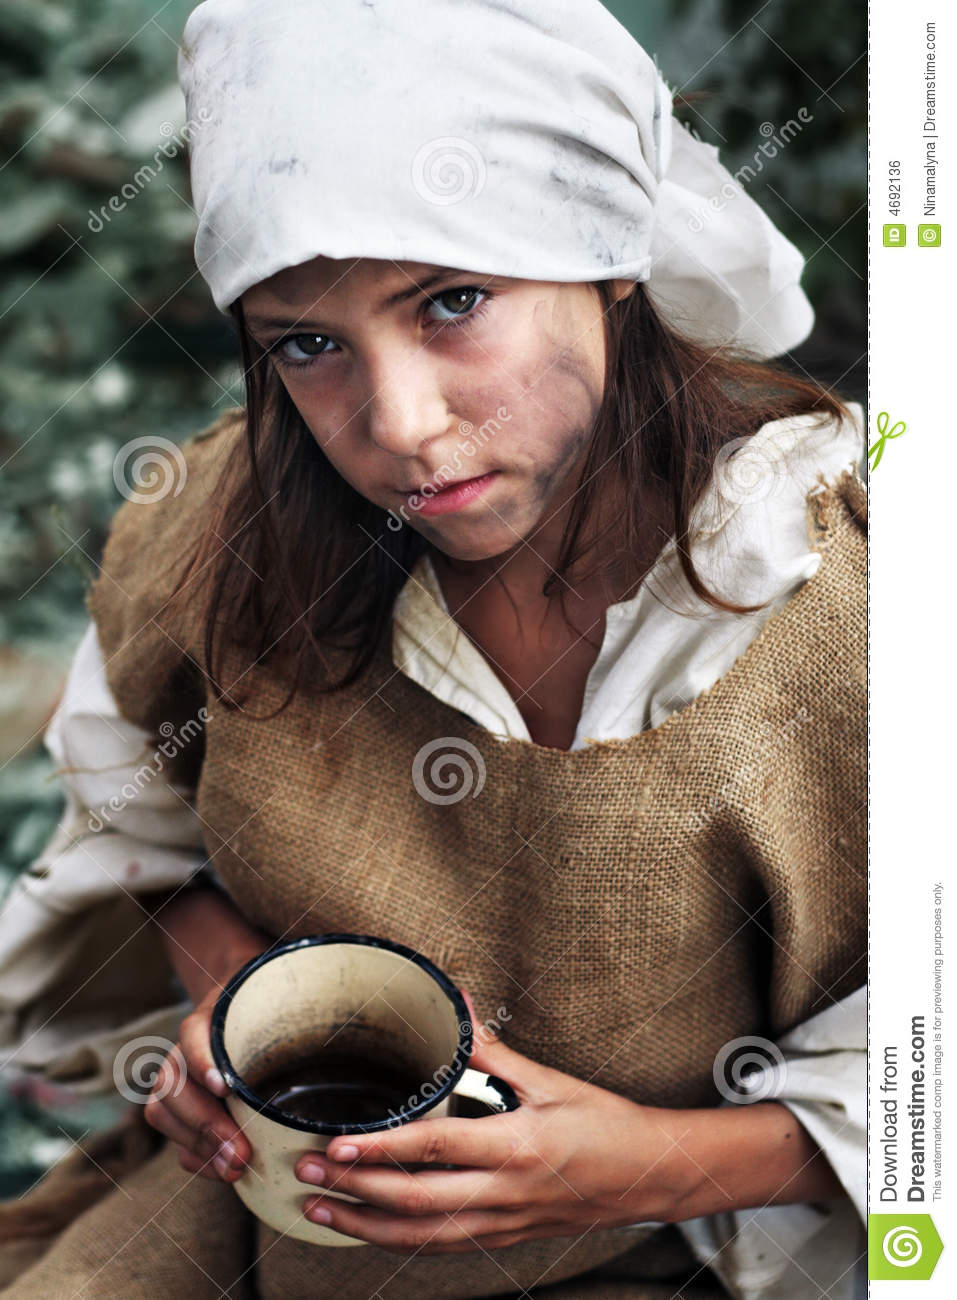 Poor Little Girl Wearing Dirty Clothes With A Vintage Mug In Her Hands    